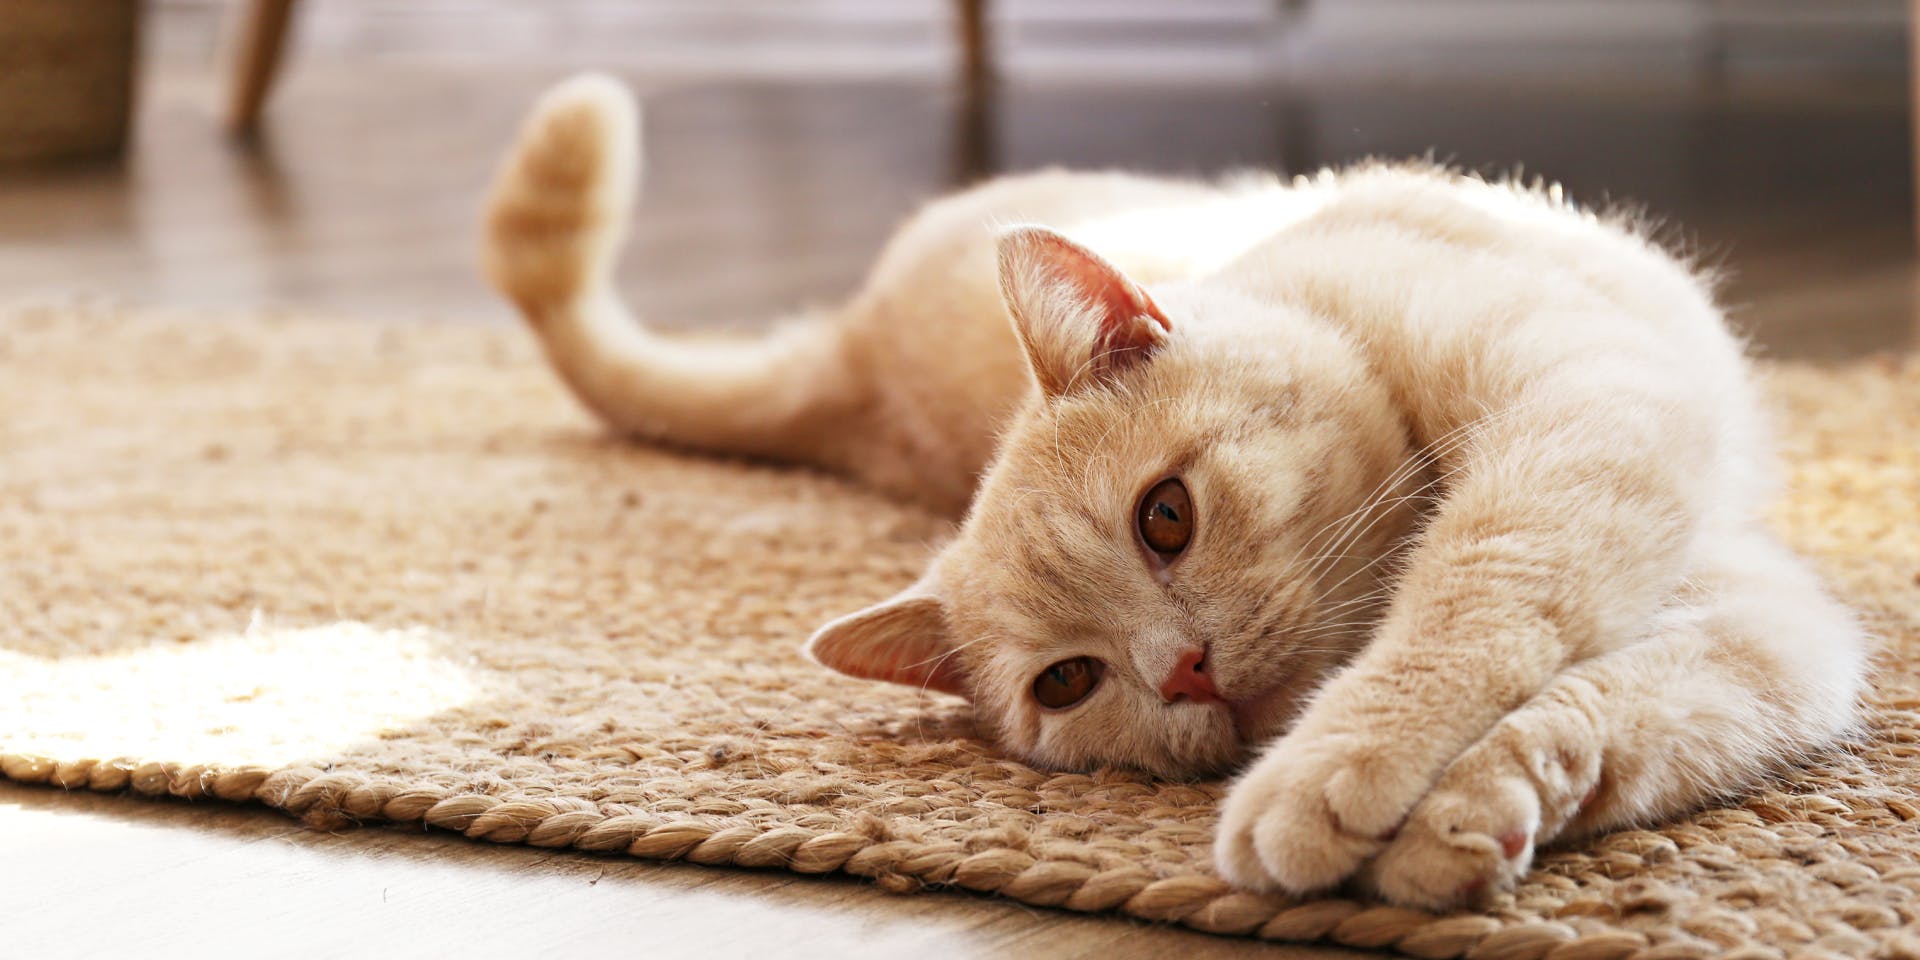 A ginger cat on a rug.